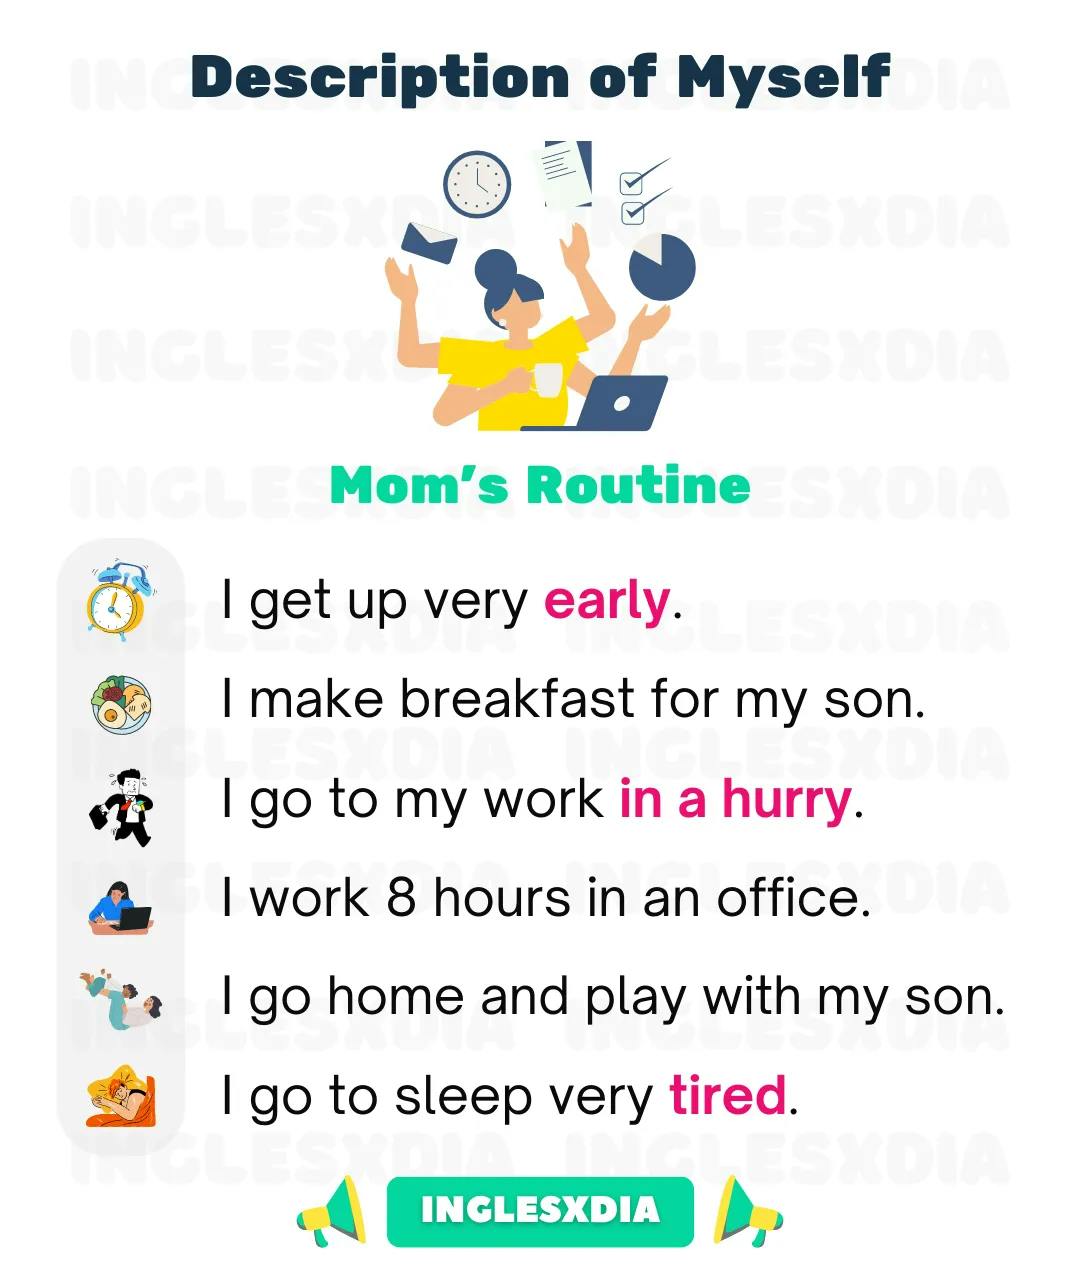 Mom's Routine